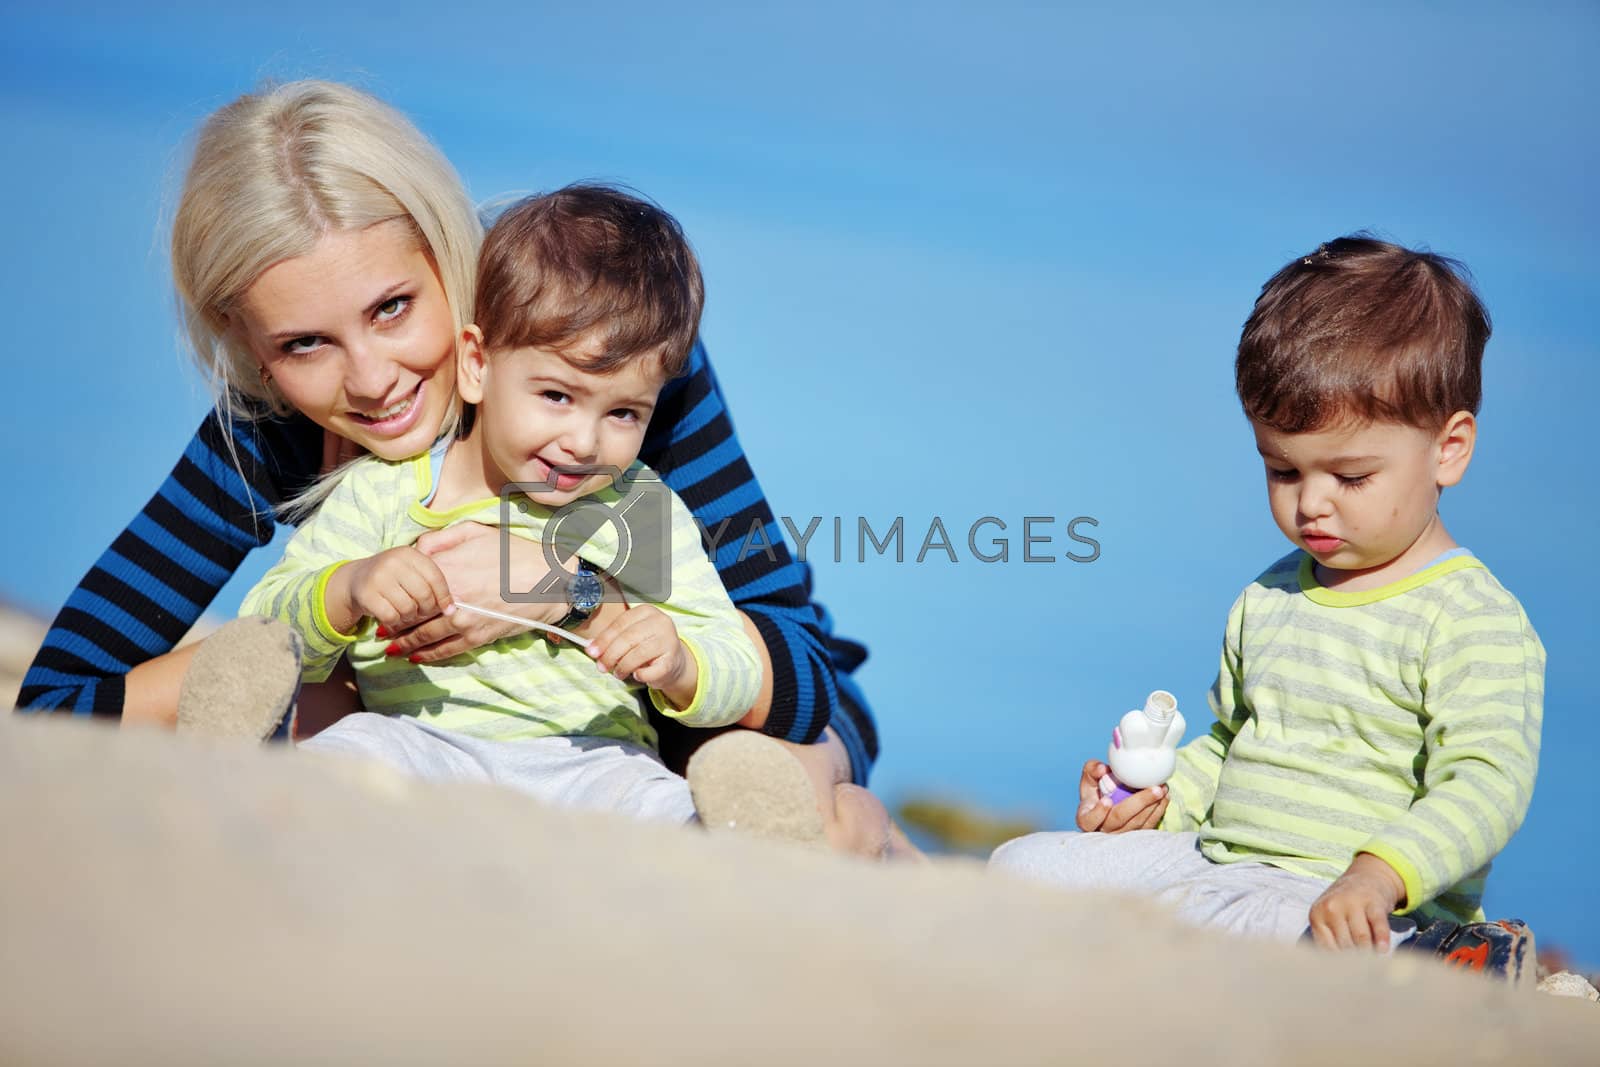 Royalty free image of Family leisure by alenkasm